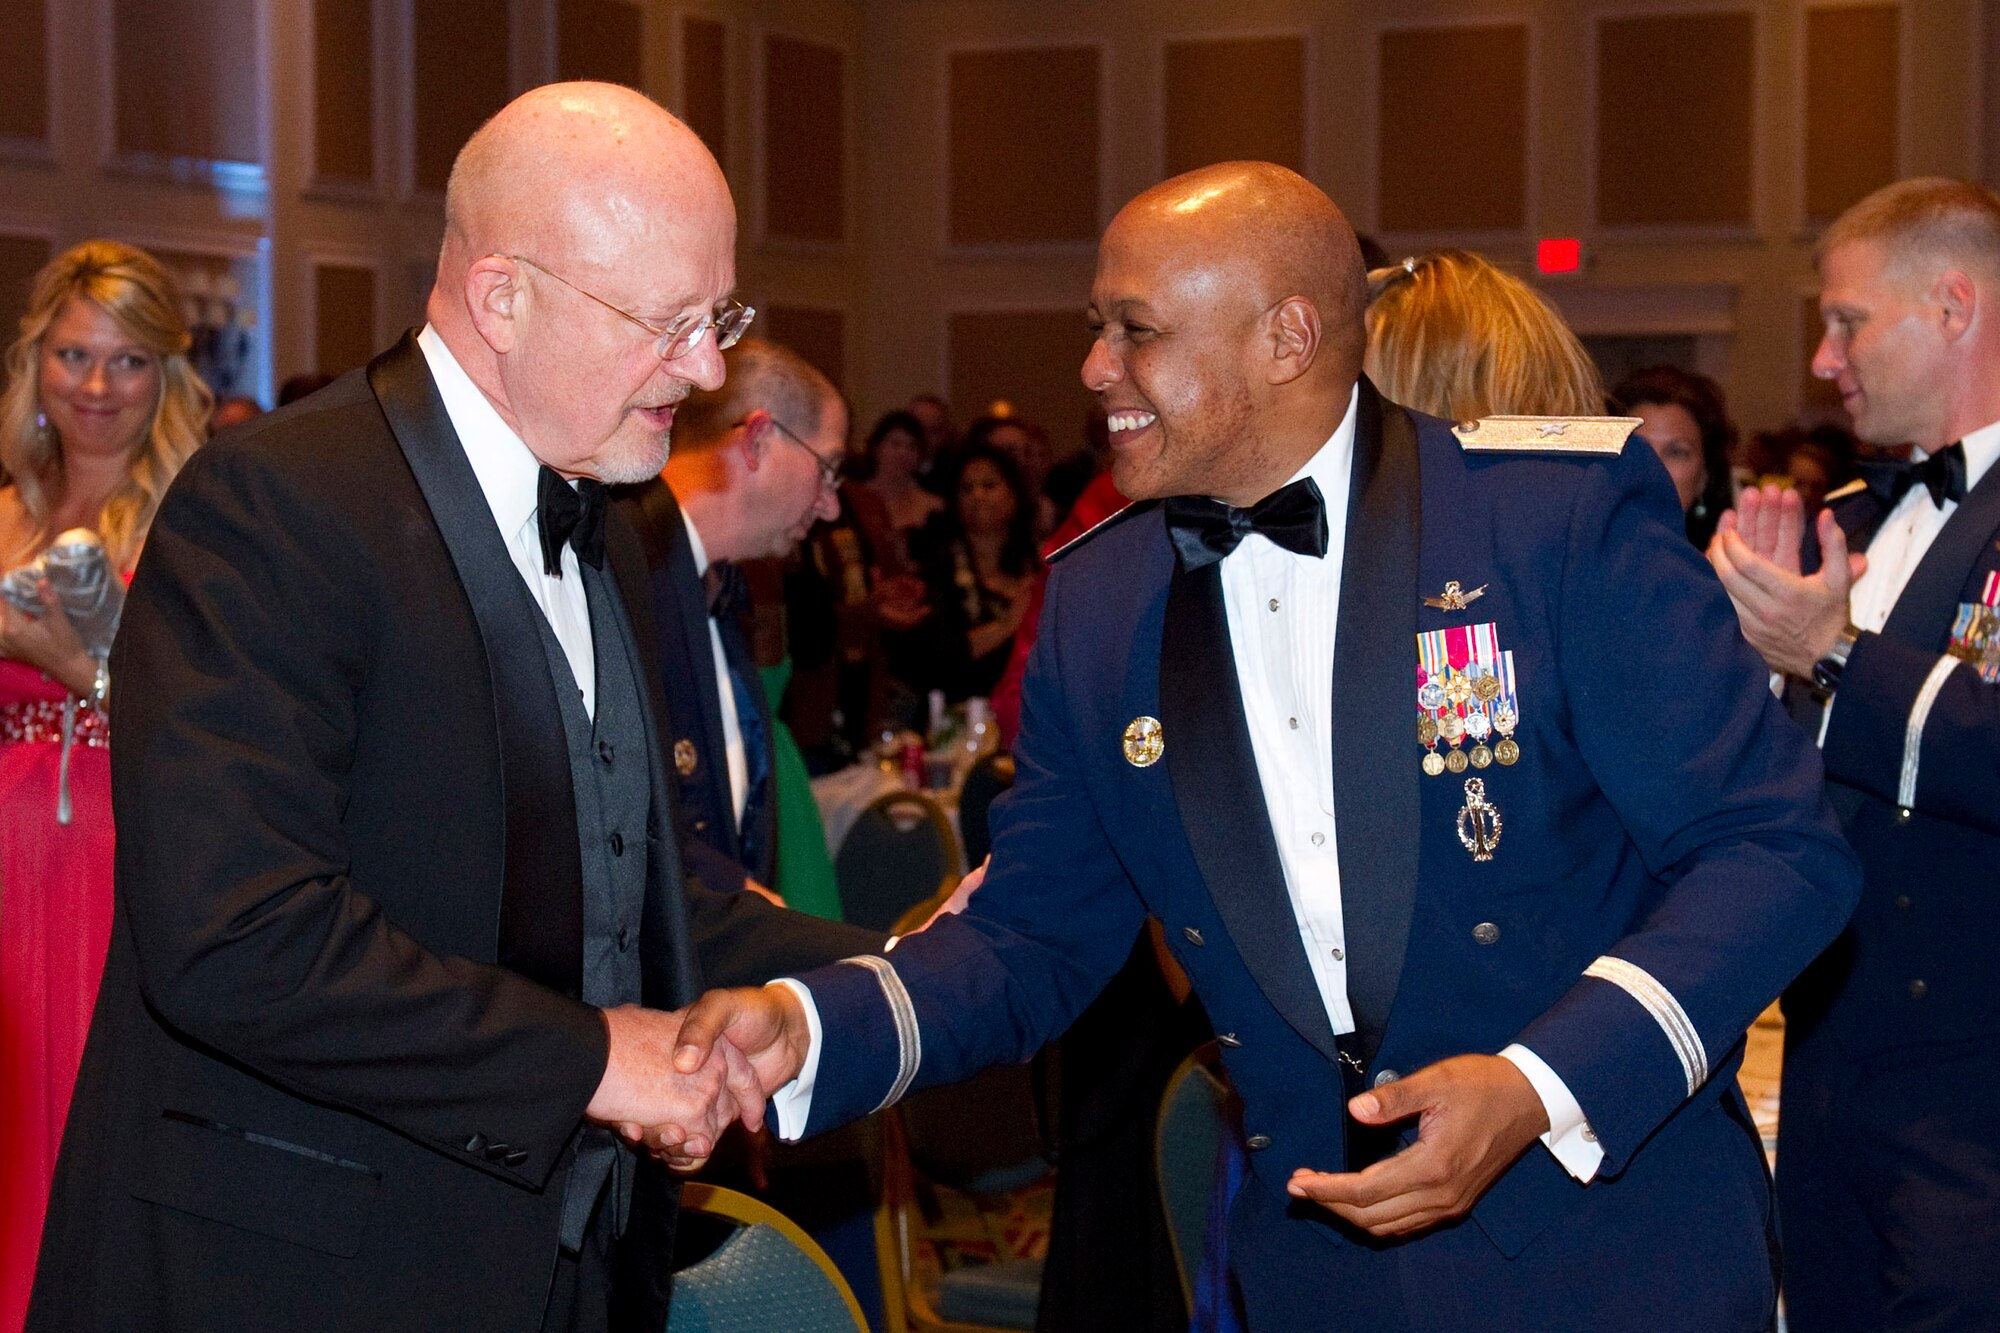 Brig. Gen. Anthony Cotton, commander, 45th Space Wing, thanks the Honorable
James R. Clapper, Jr. Director of National Intelligence, during the 65th
Anniversary of the Air Force Ball held Nov. 4 in Cape Canaveral. Director
Clapper, who served as the events guest speaker, is also a retired Air Force
Lieutenant General and a former commander of the Air Force Technical
Applications Center.
